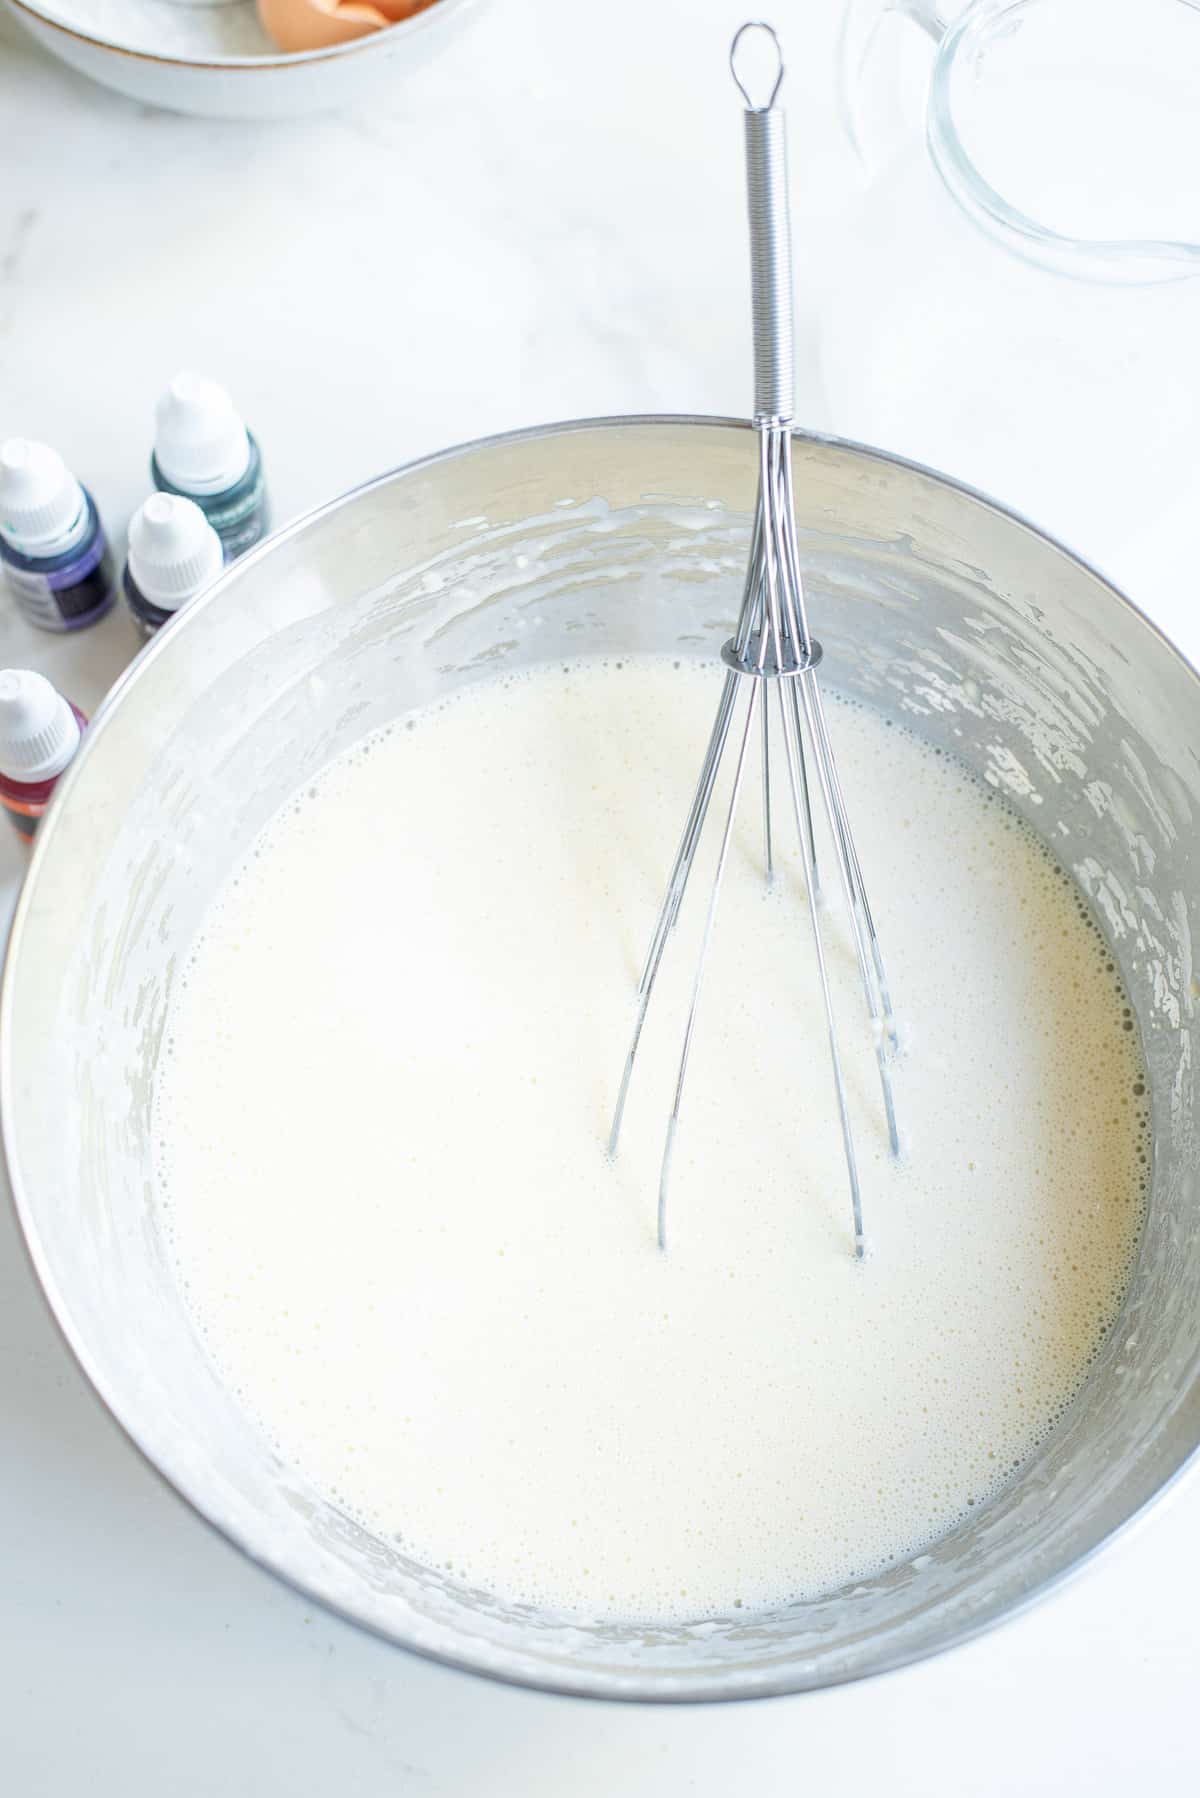 Pancake batter in a bowl with a whisk.